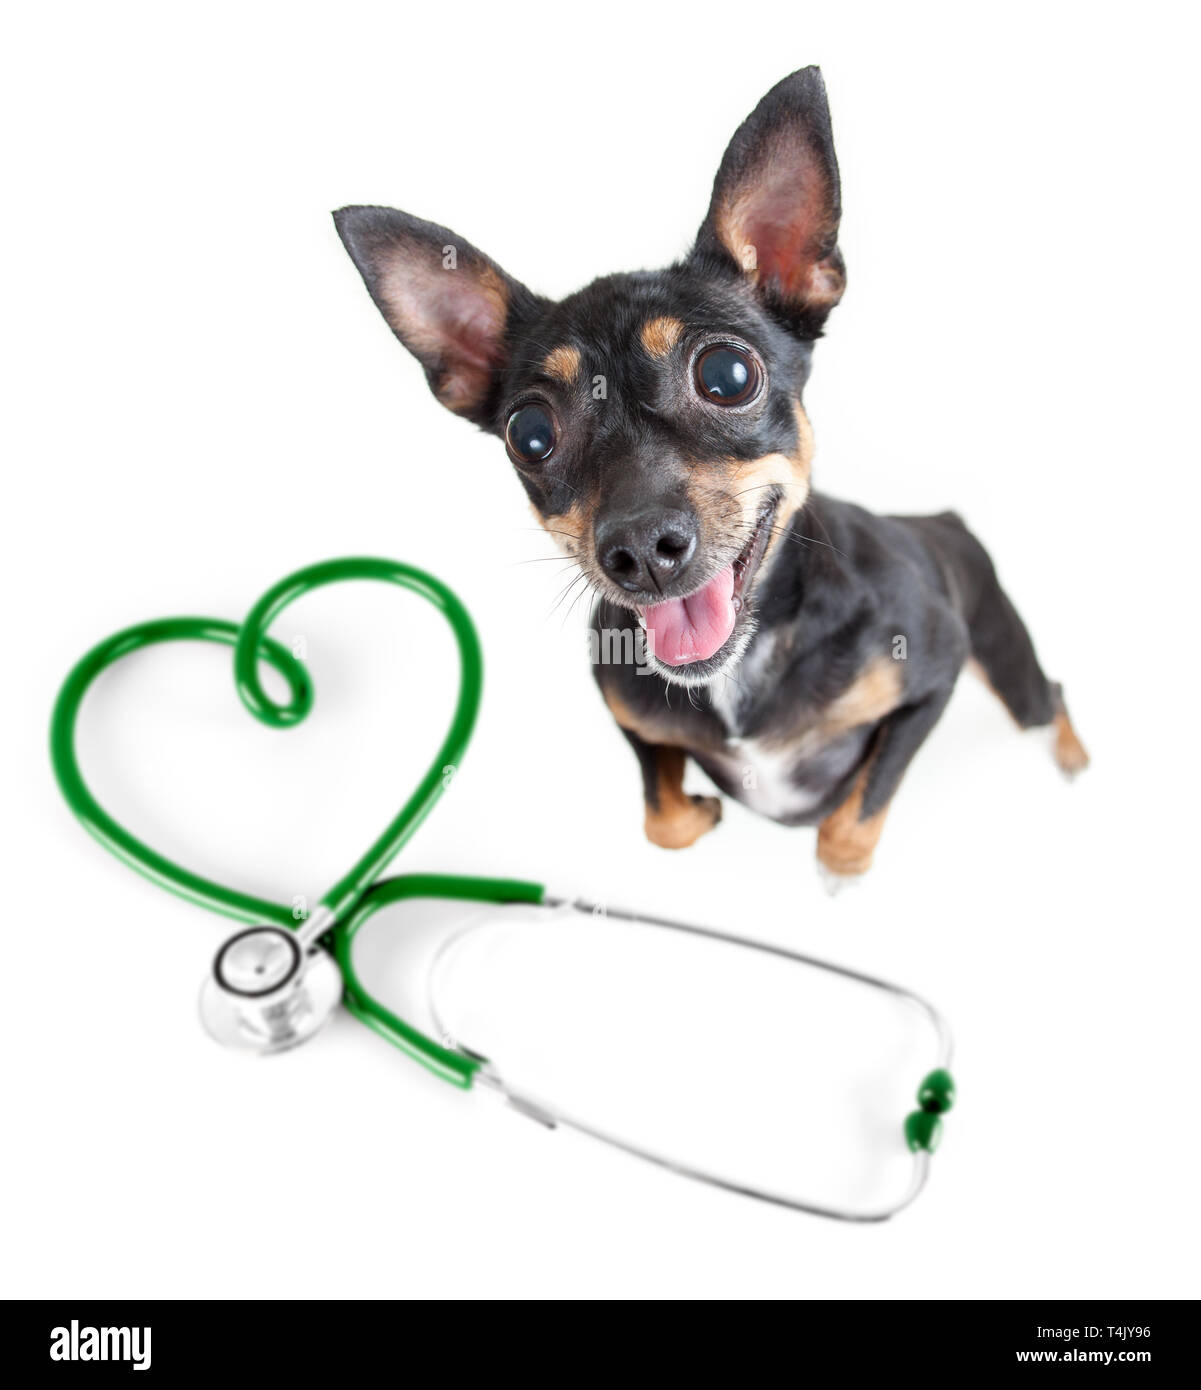 Veterinary for dogs and other pets . Dog standing and stethoscope top view standing isolated. Stock Photo